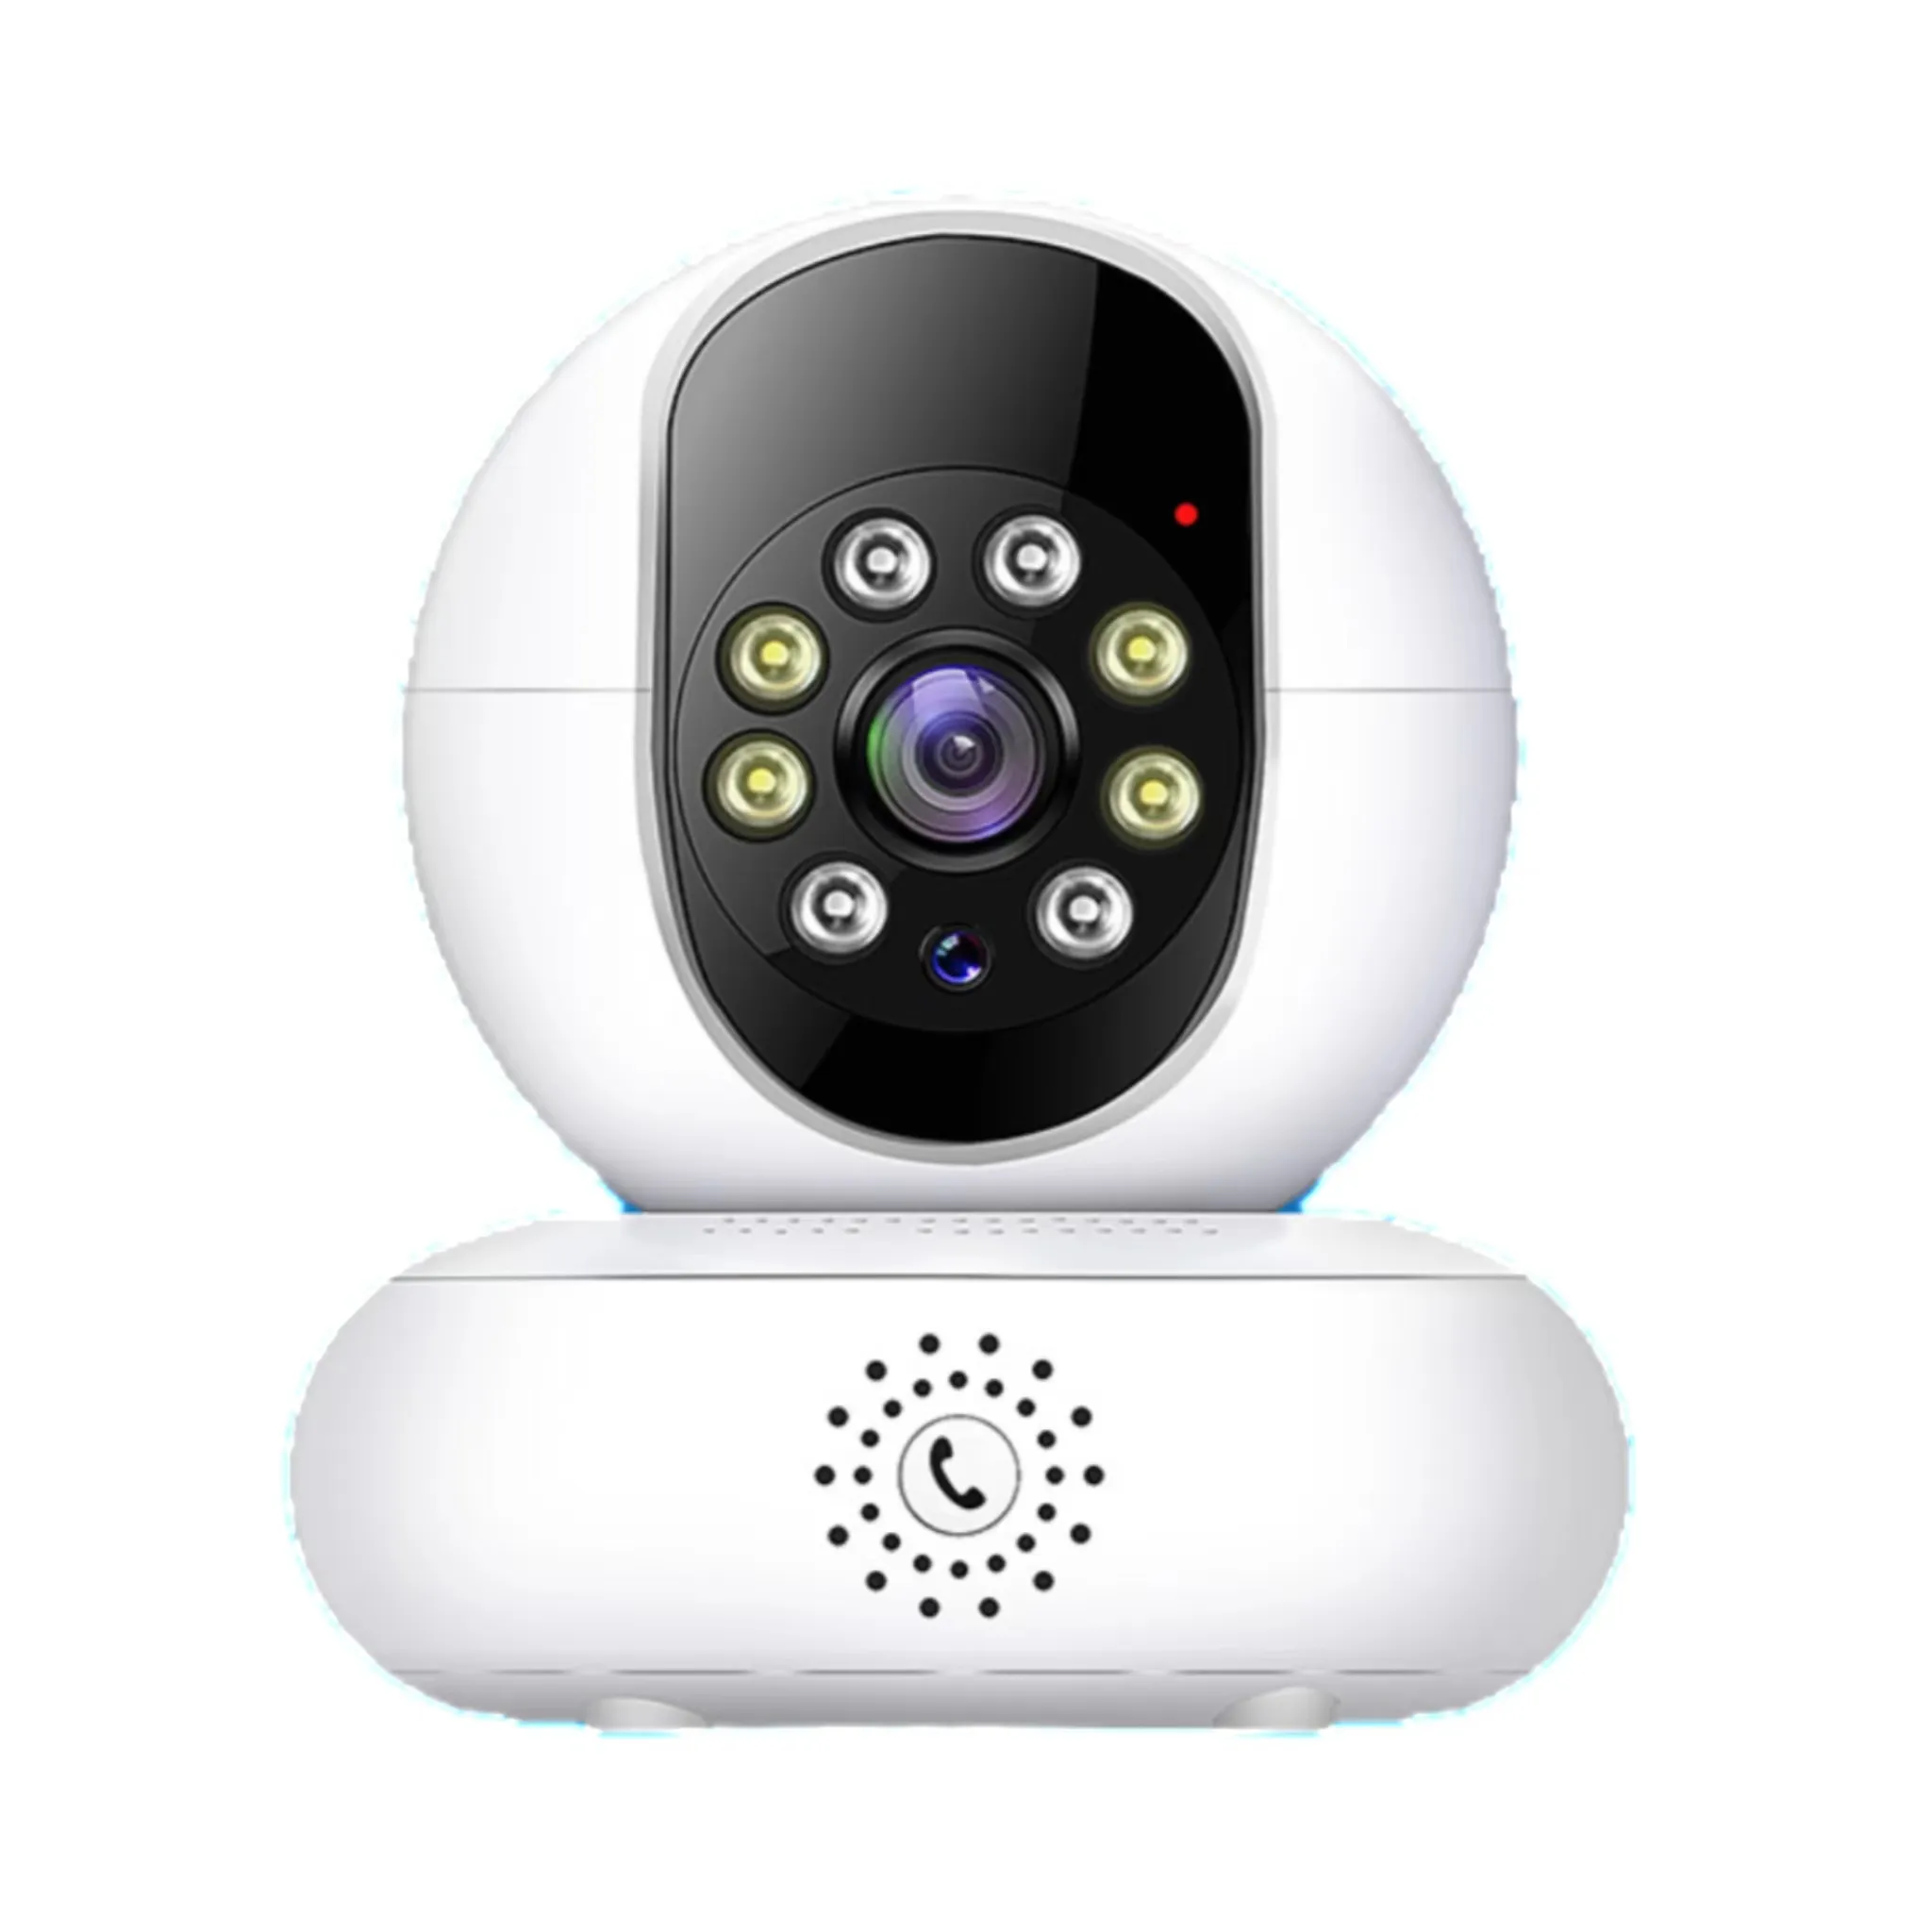 Smart Home security cctv cheapest camera with high quality connected to mobile phone spy cameras with audio and video